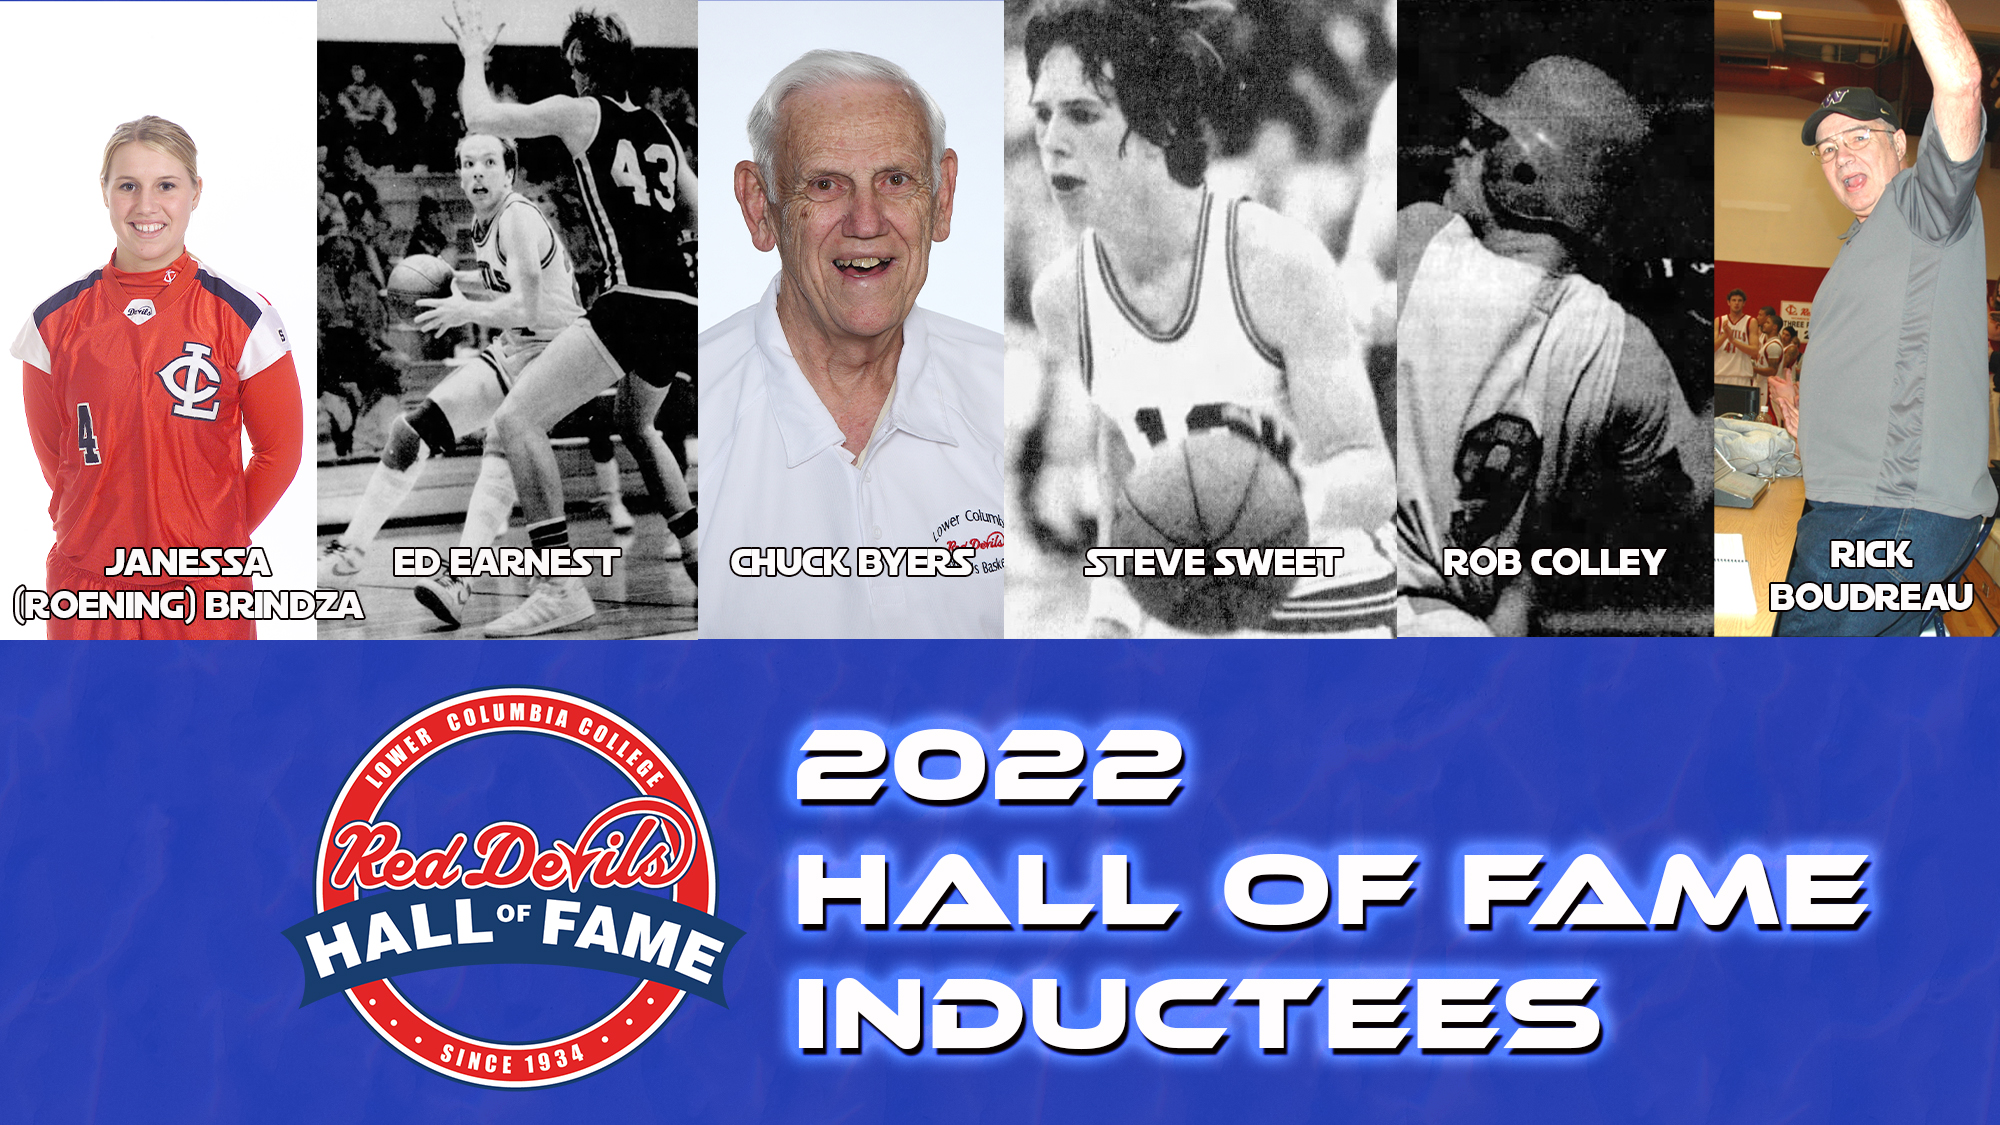 2022 hall of fames inductees banner